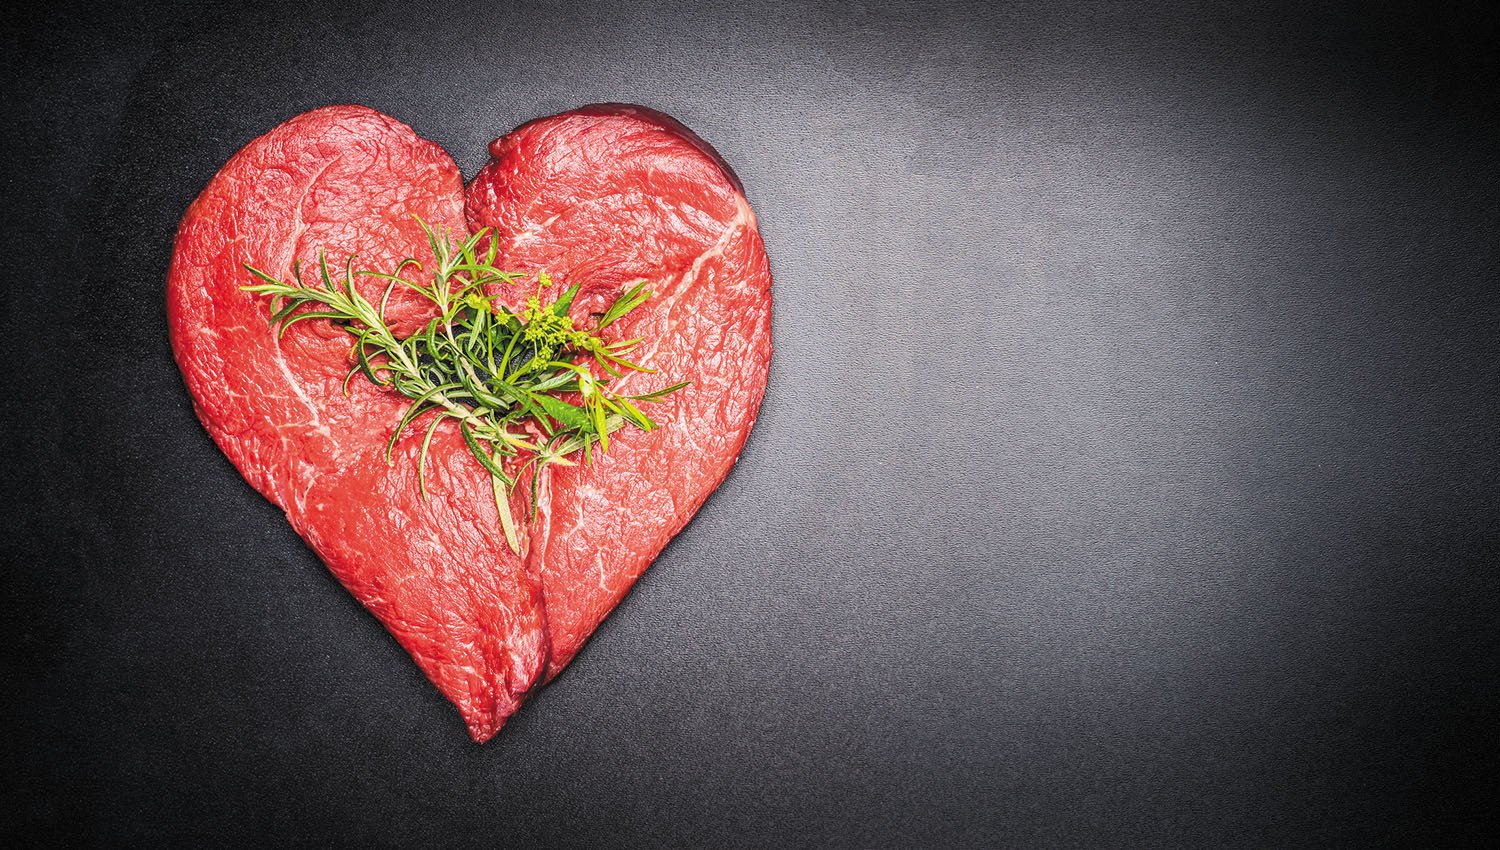 Excess Red Meat Consumption Can Trigger Heart Diseases